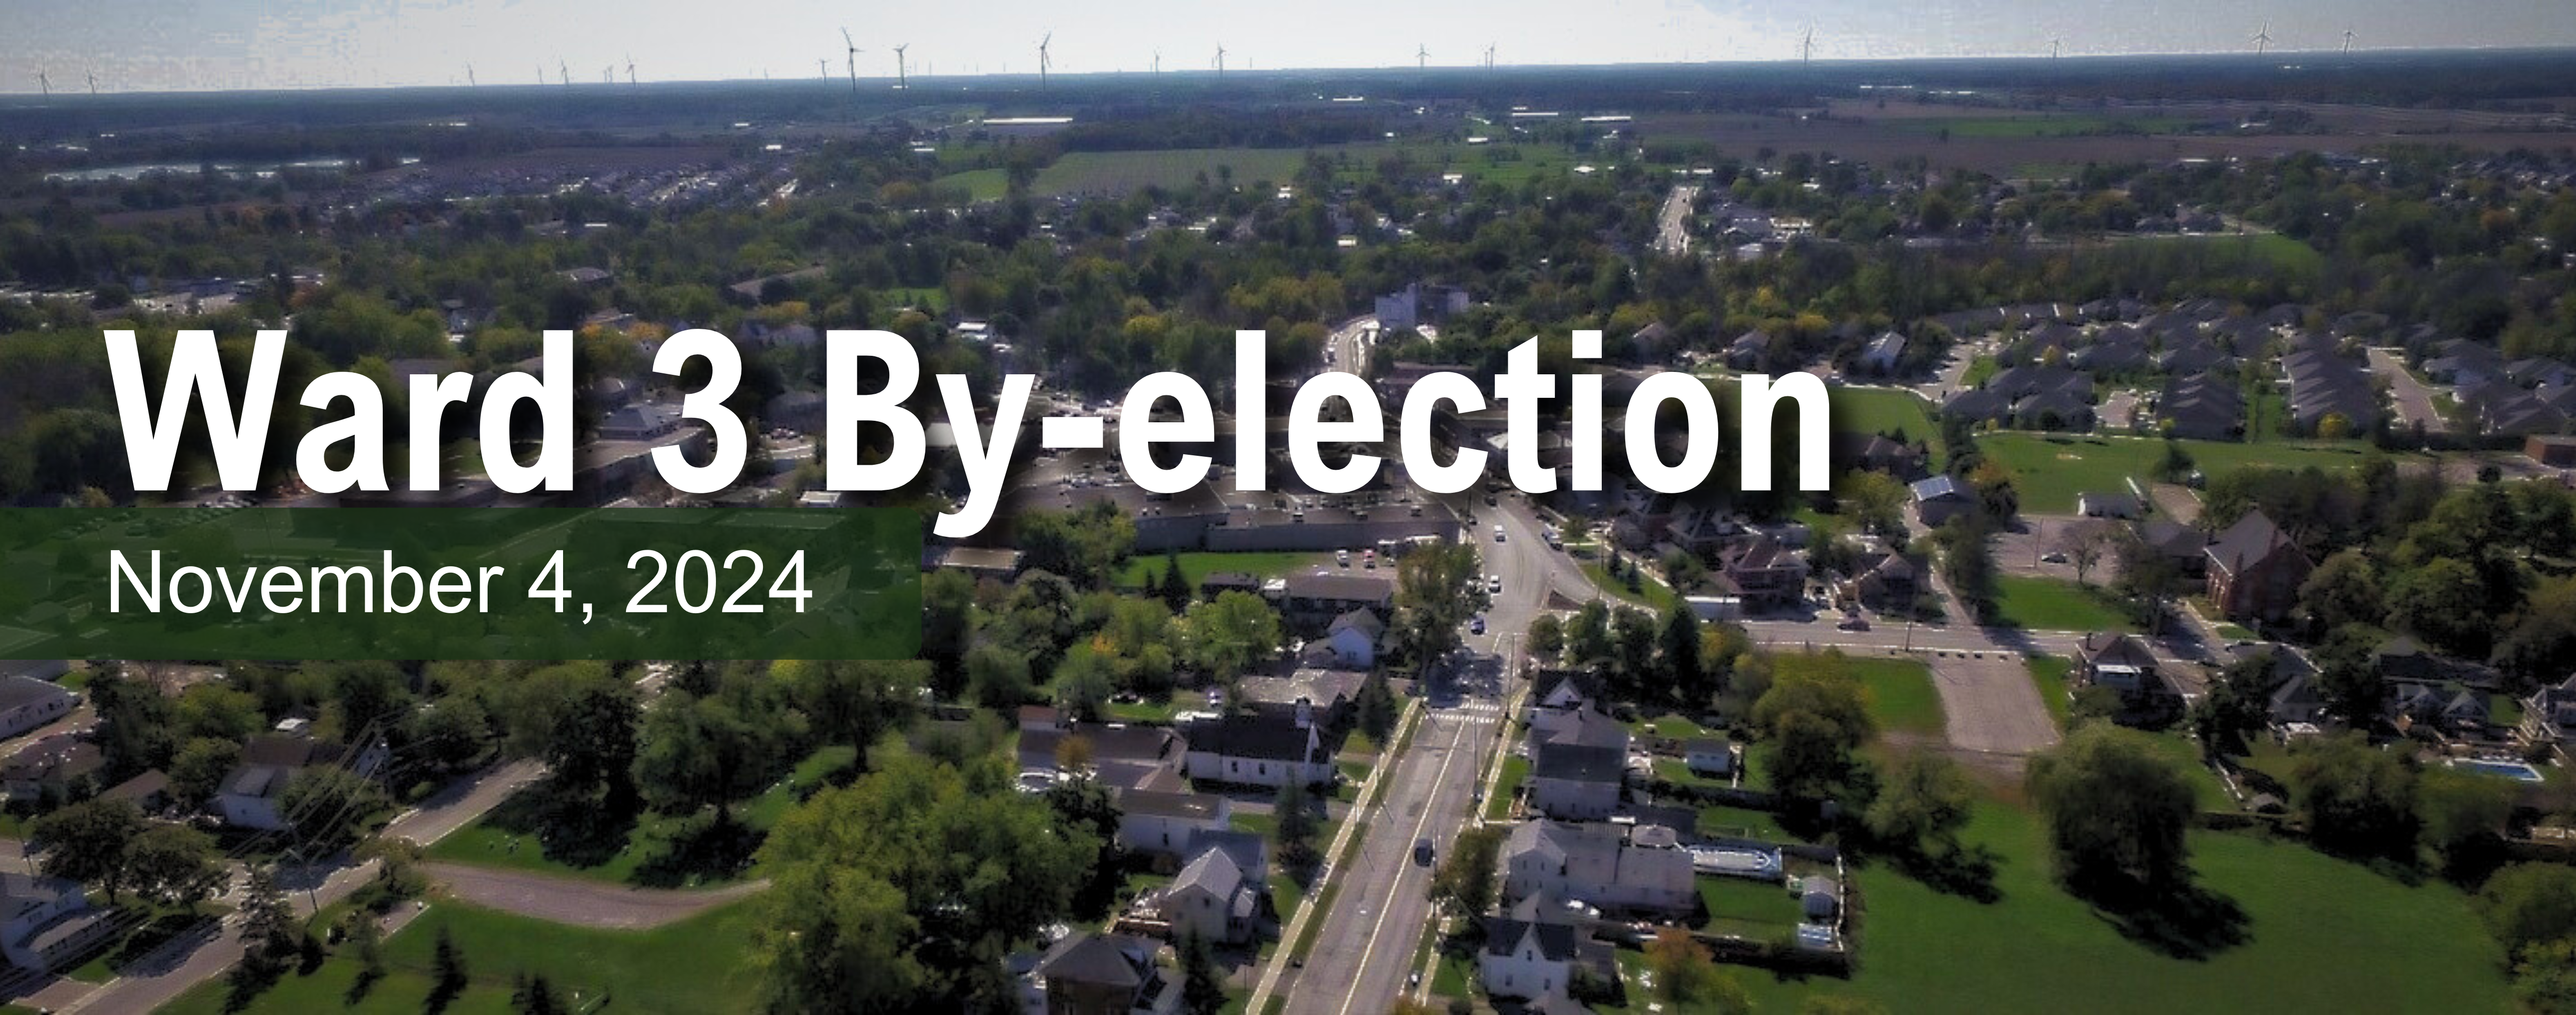 Aerial photo of Smithville with text that says Ward 3 By-election November 4, 2024